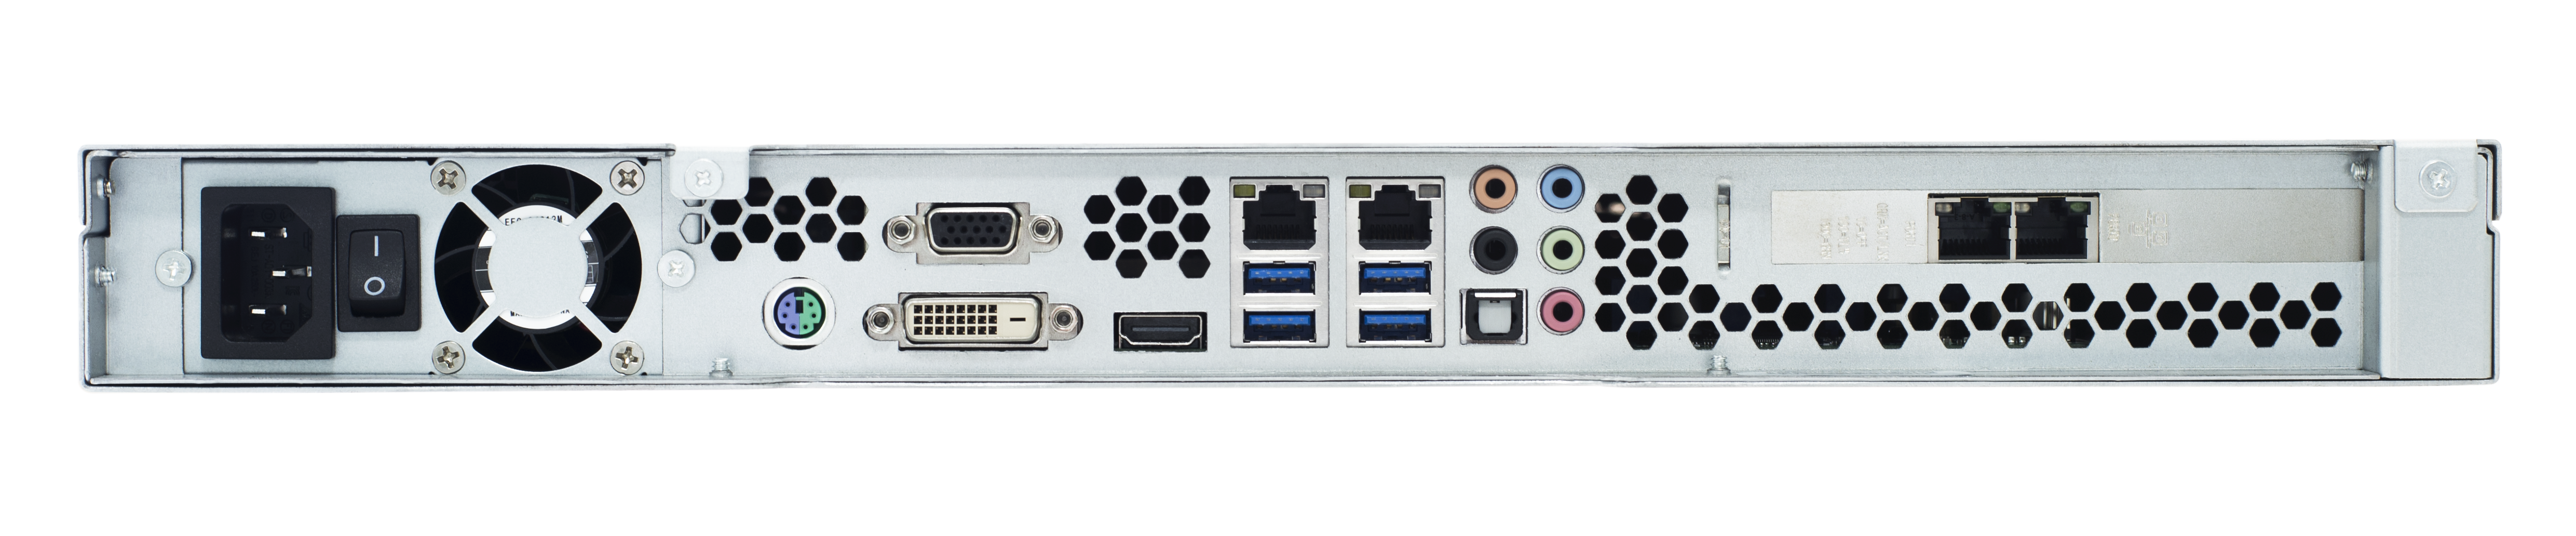 Ossia VMS embedded Management server Supporting up to 512 channels